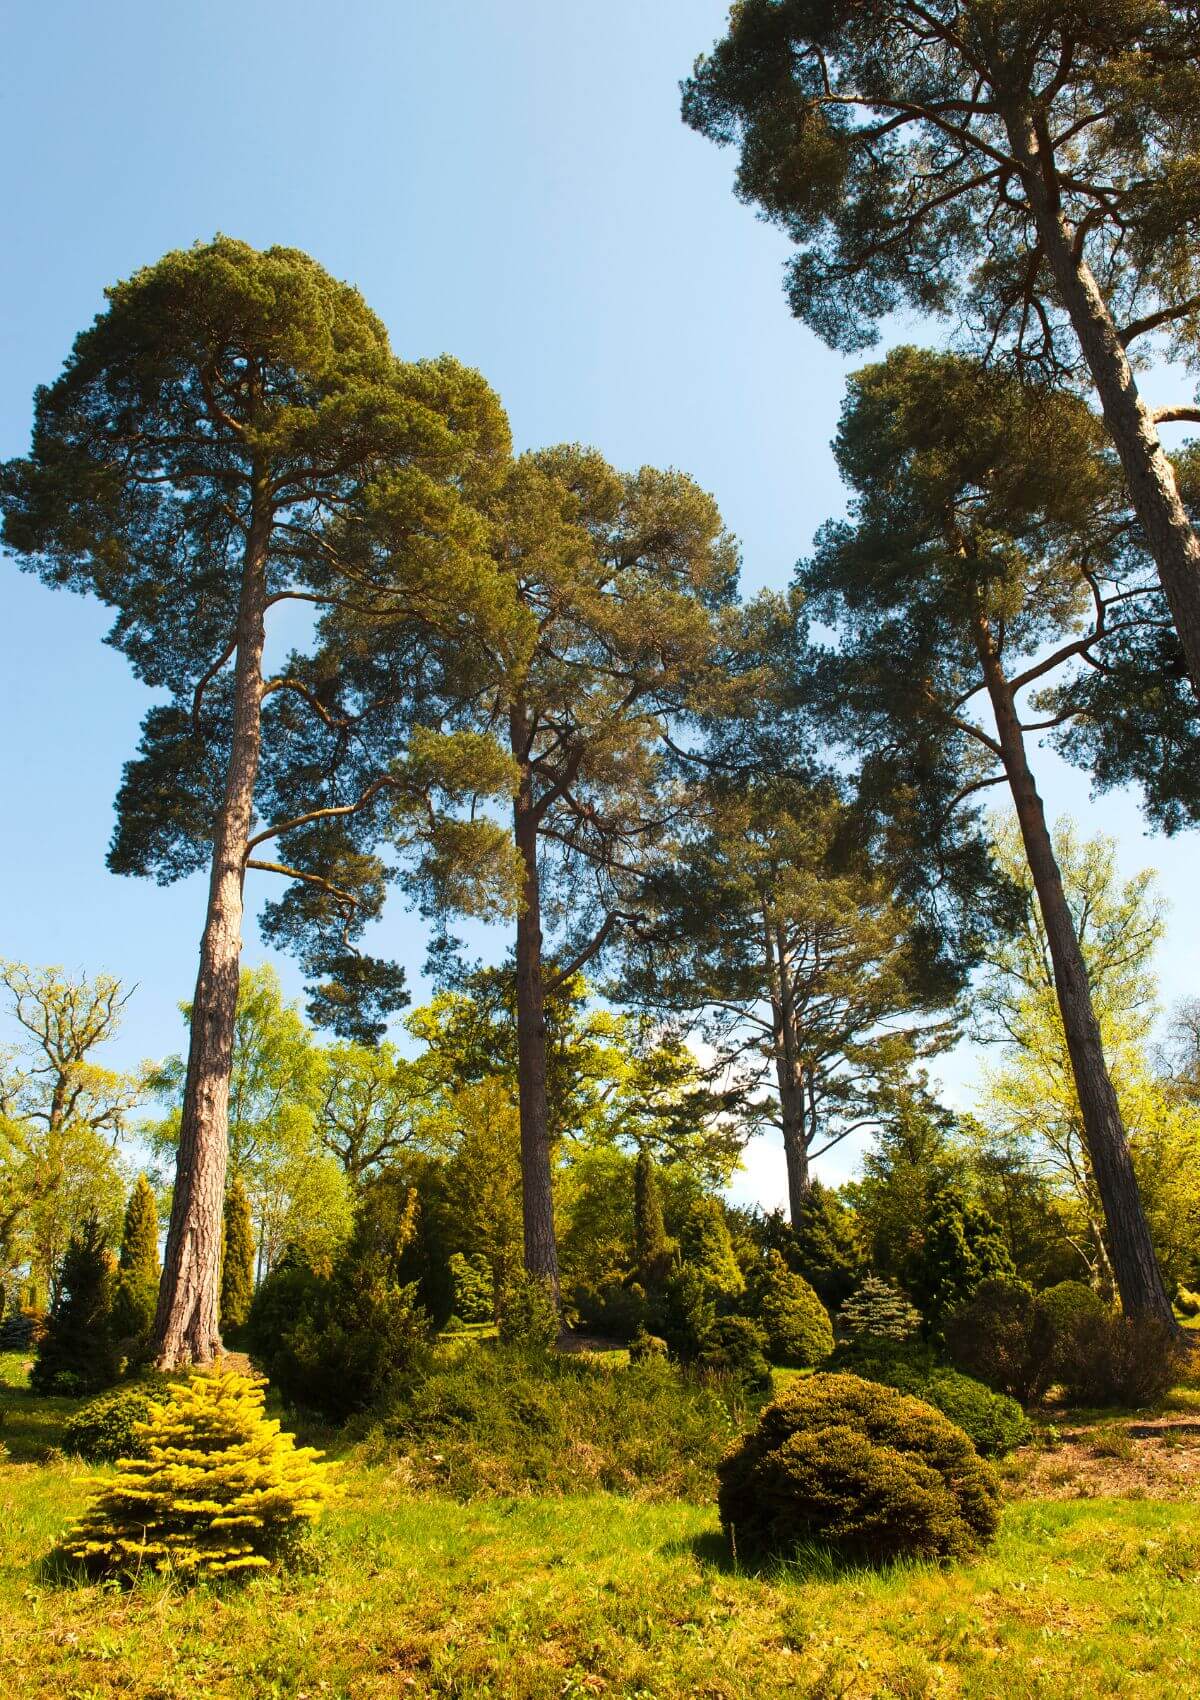 Bedgebury National Pinetum and Forest in England